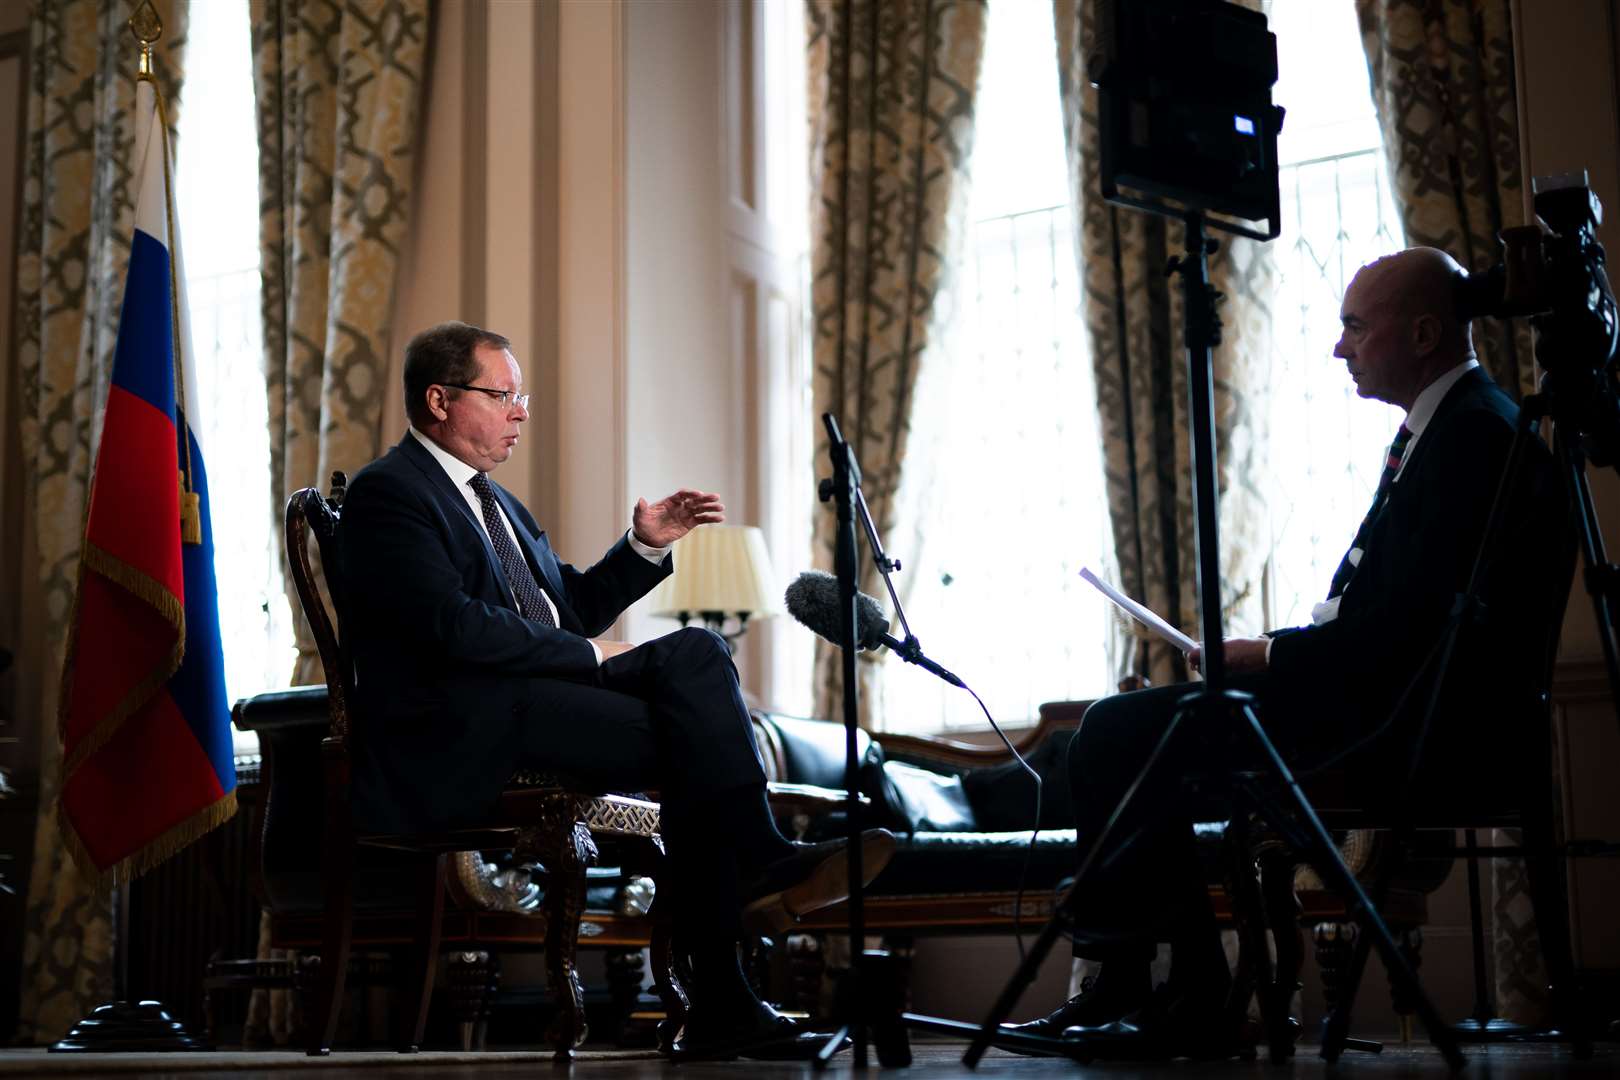 Russian ambassador Andrei Kelin during an interview with PA at his official residence in London (Aaron Chown/PA)